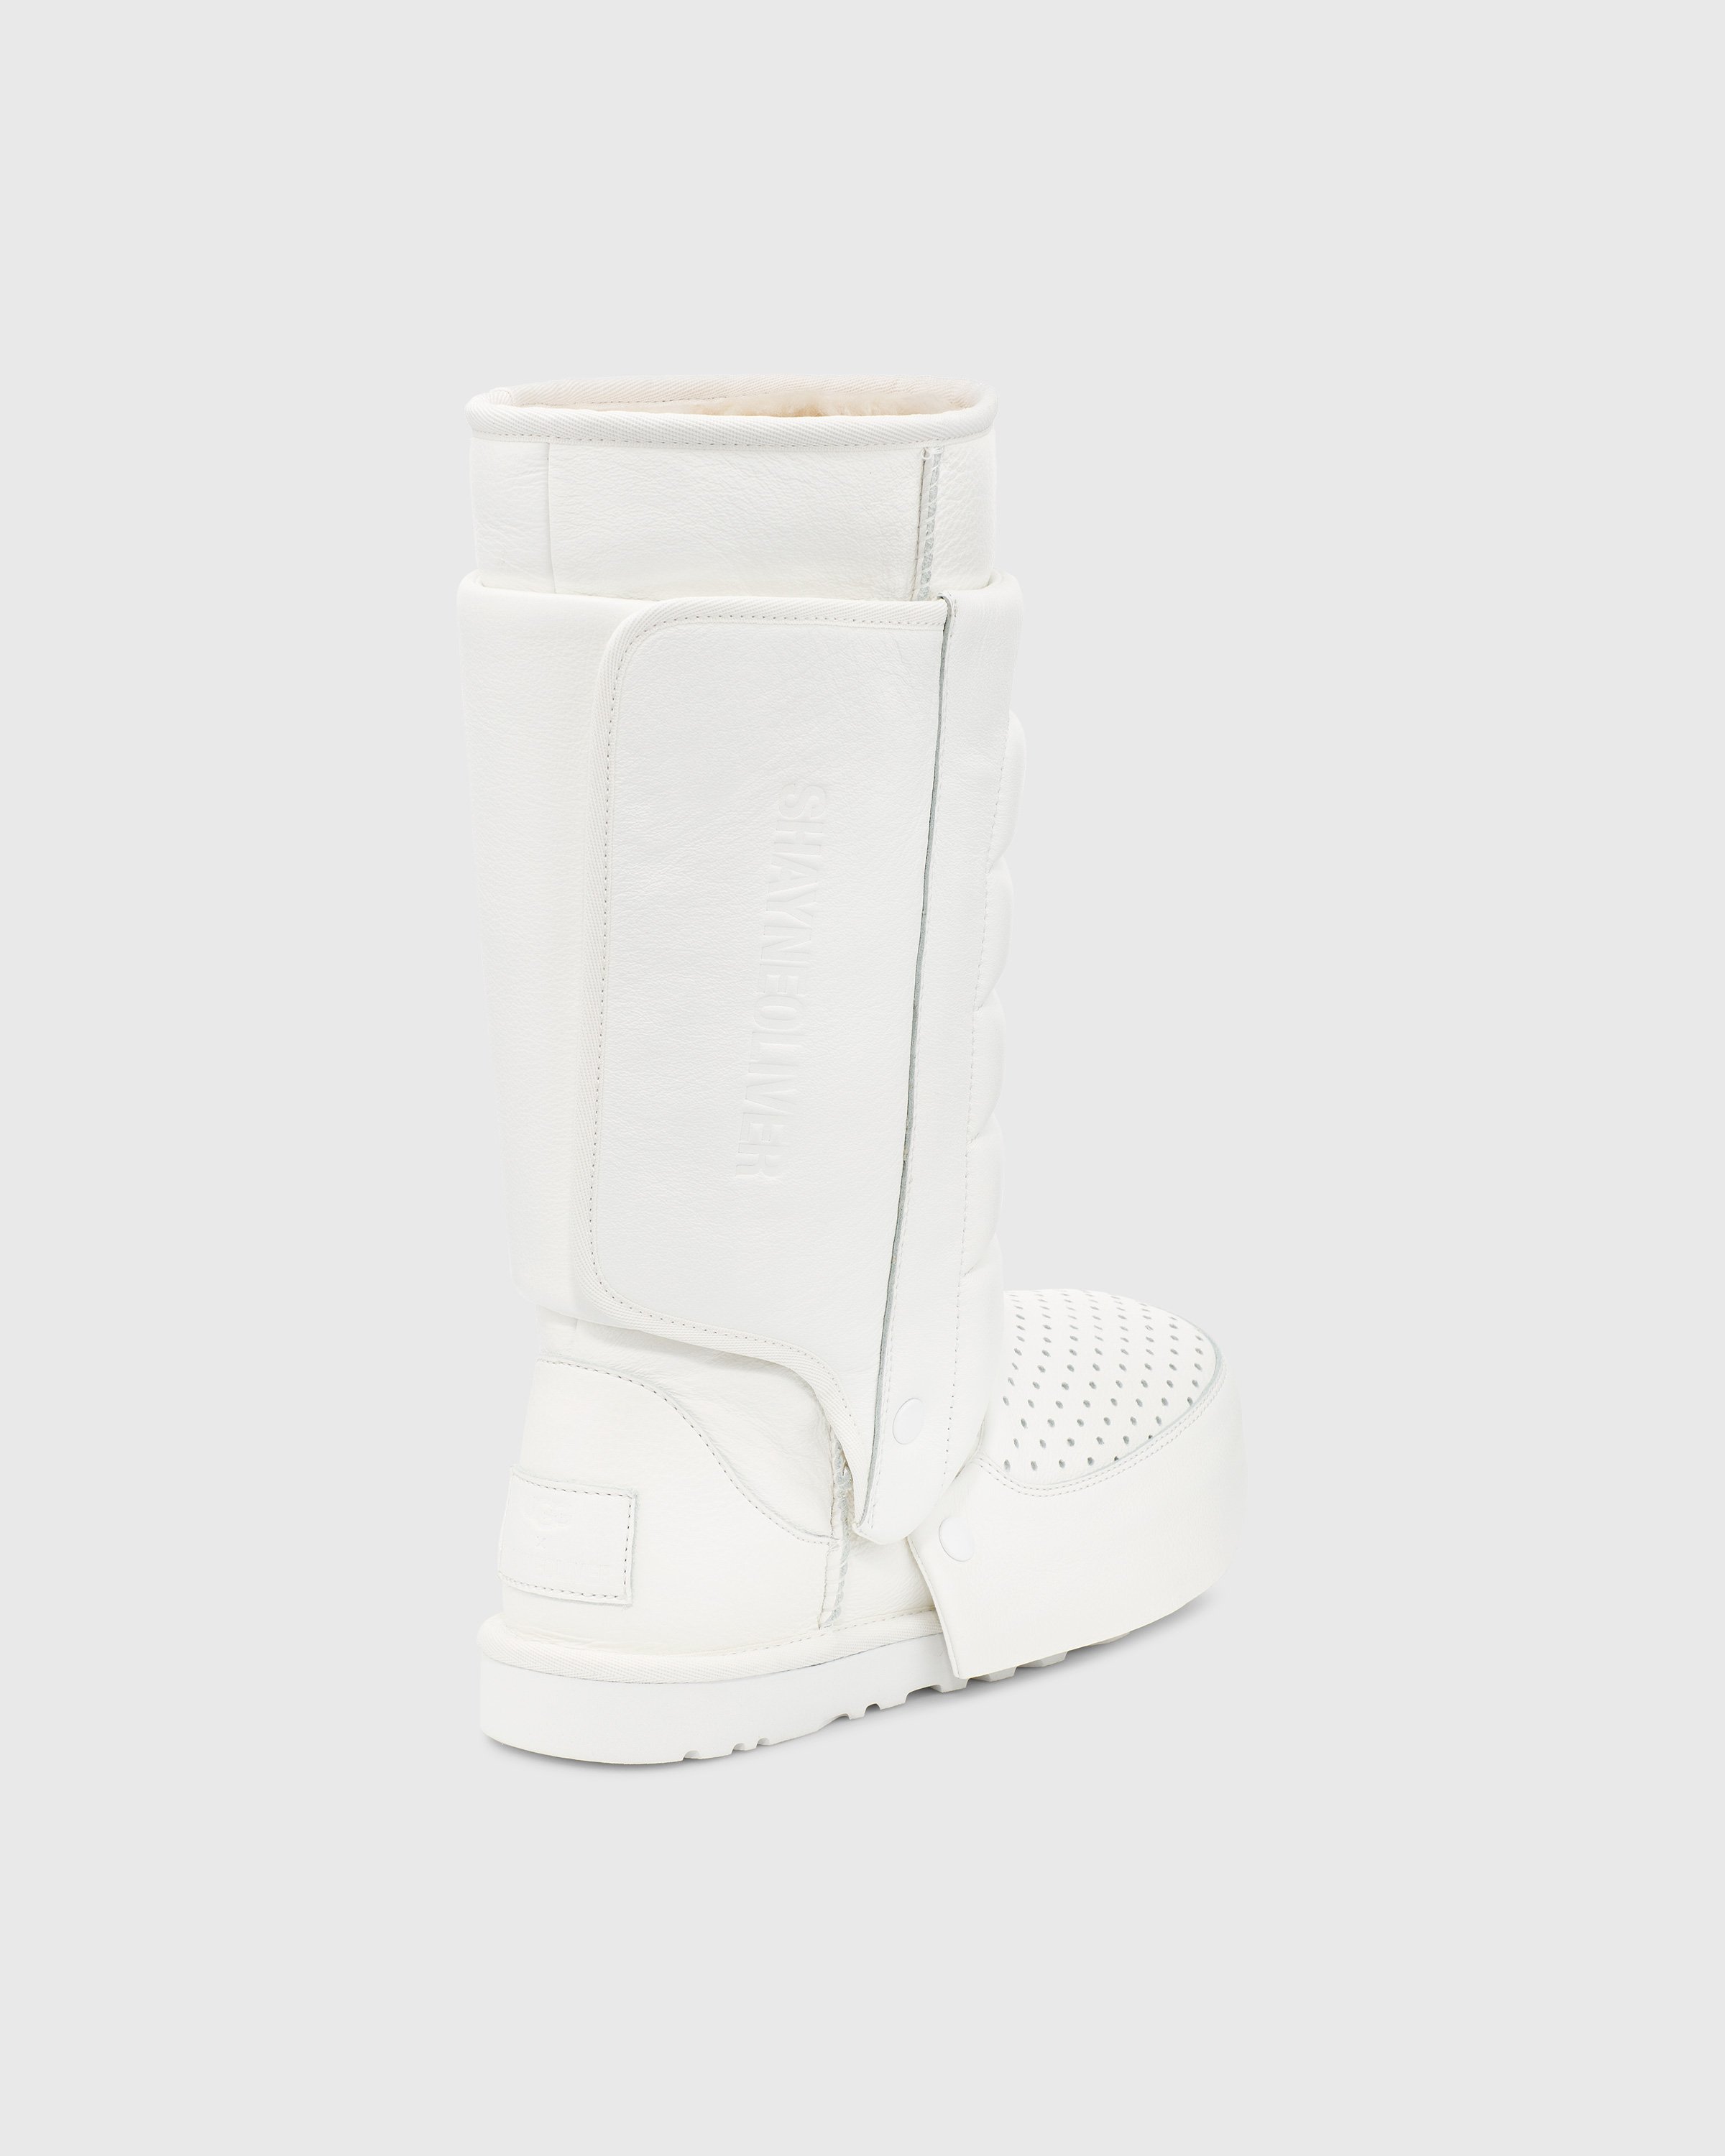 Ugg x Shayne Oliver - Tall Boot White - Footwear - White - Image 3